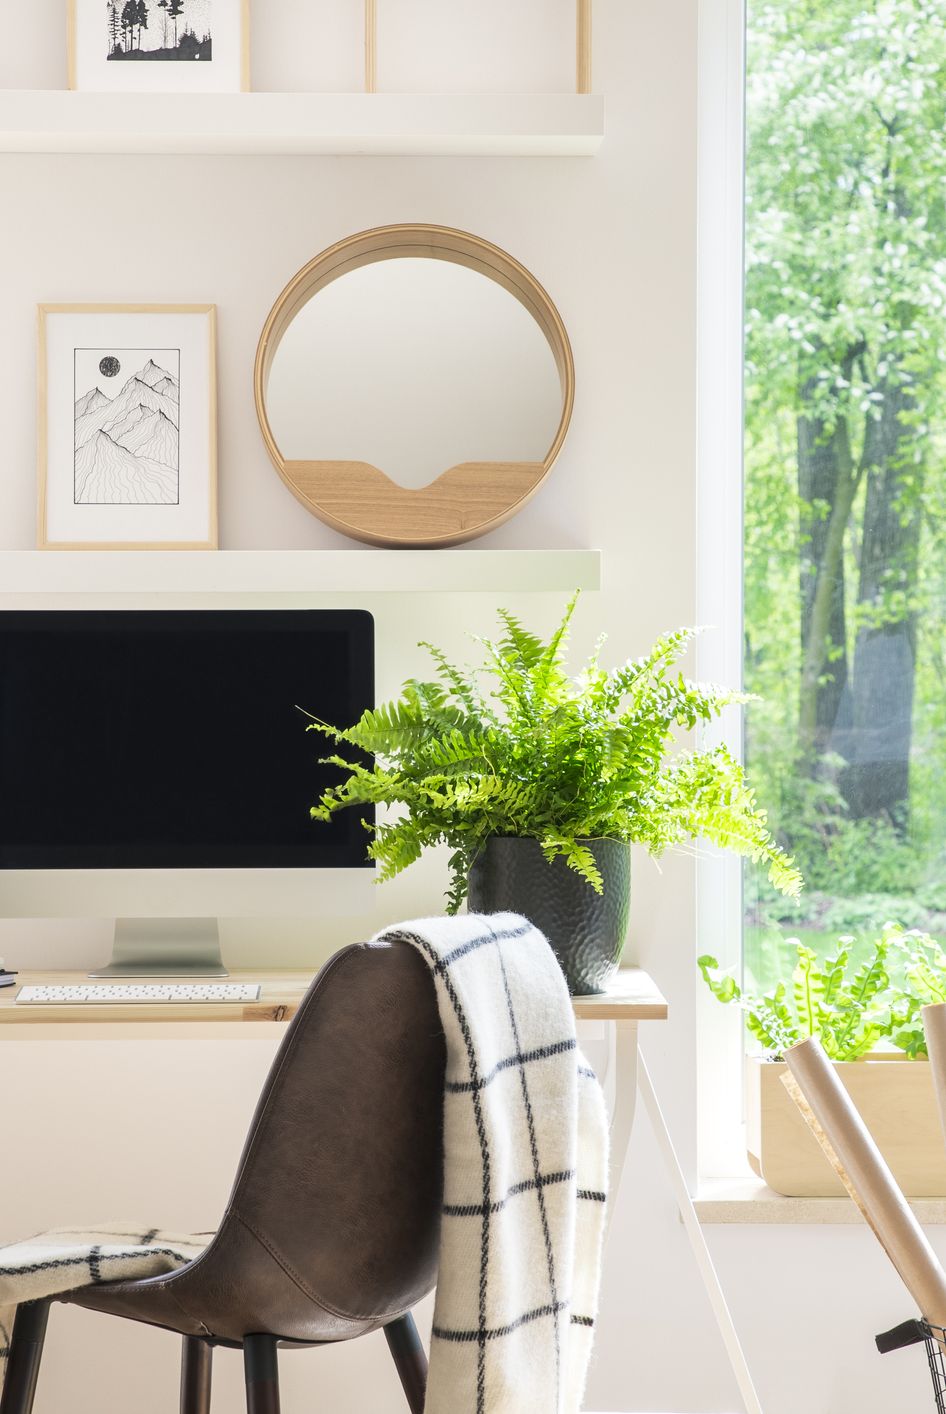 Best Work From Home Accessories 2021: How to Set Up Your Home Office